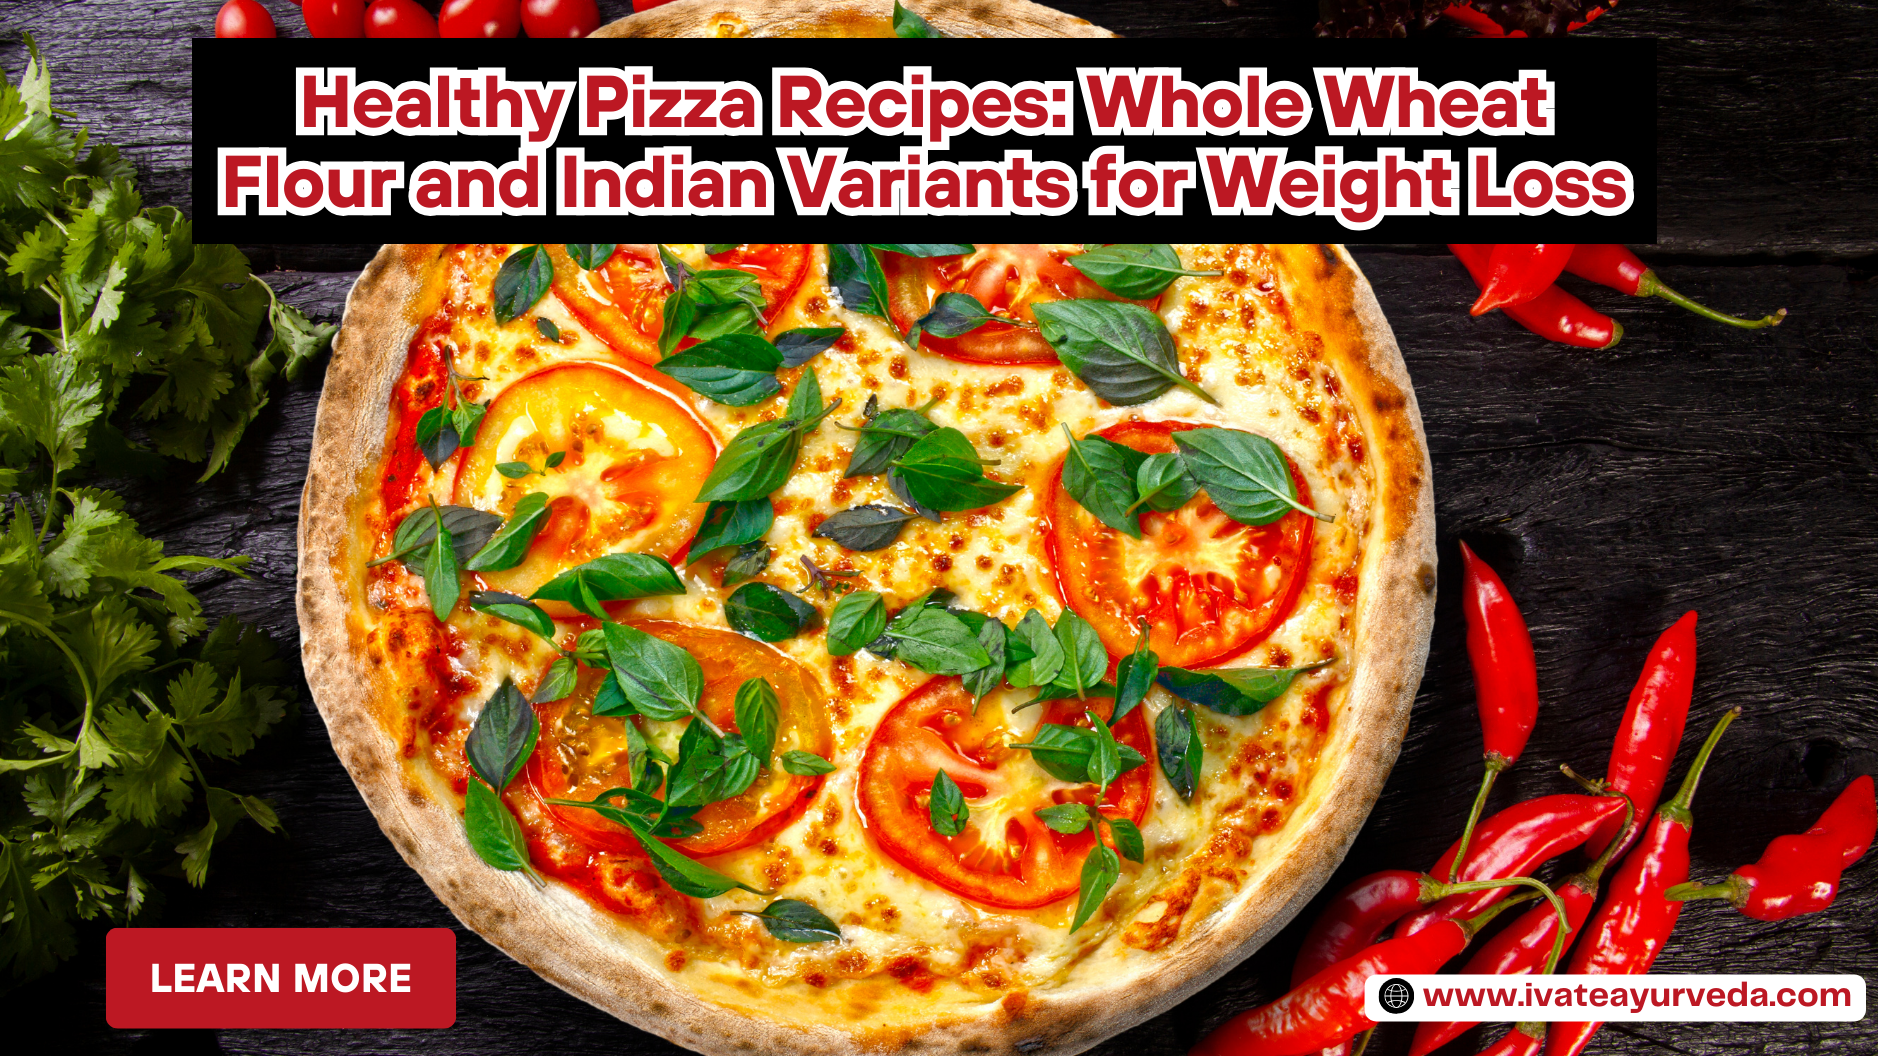 Healthy Pizza Recipes: Whole Wheat Flour and Indian Variants for Weight Loss